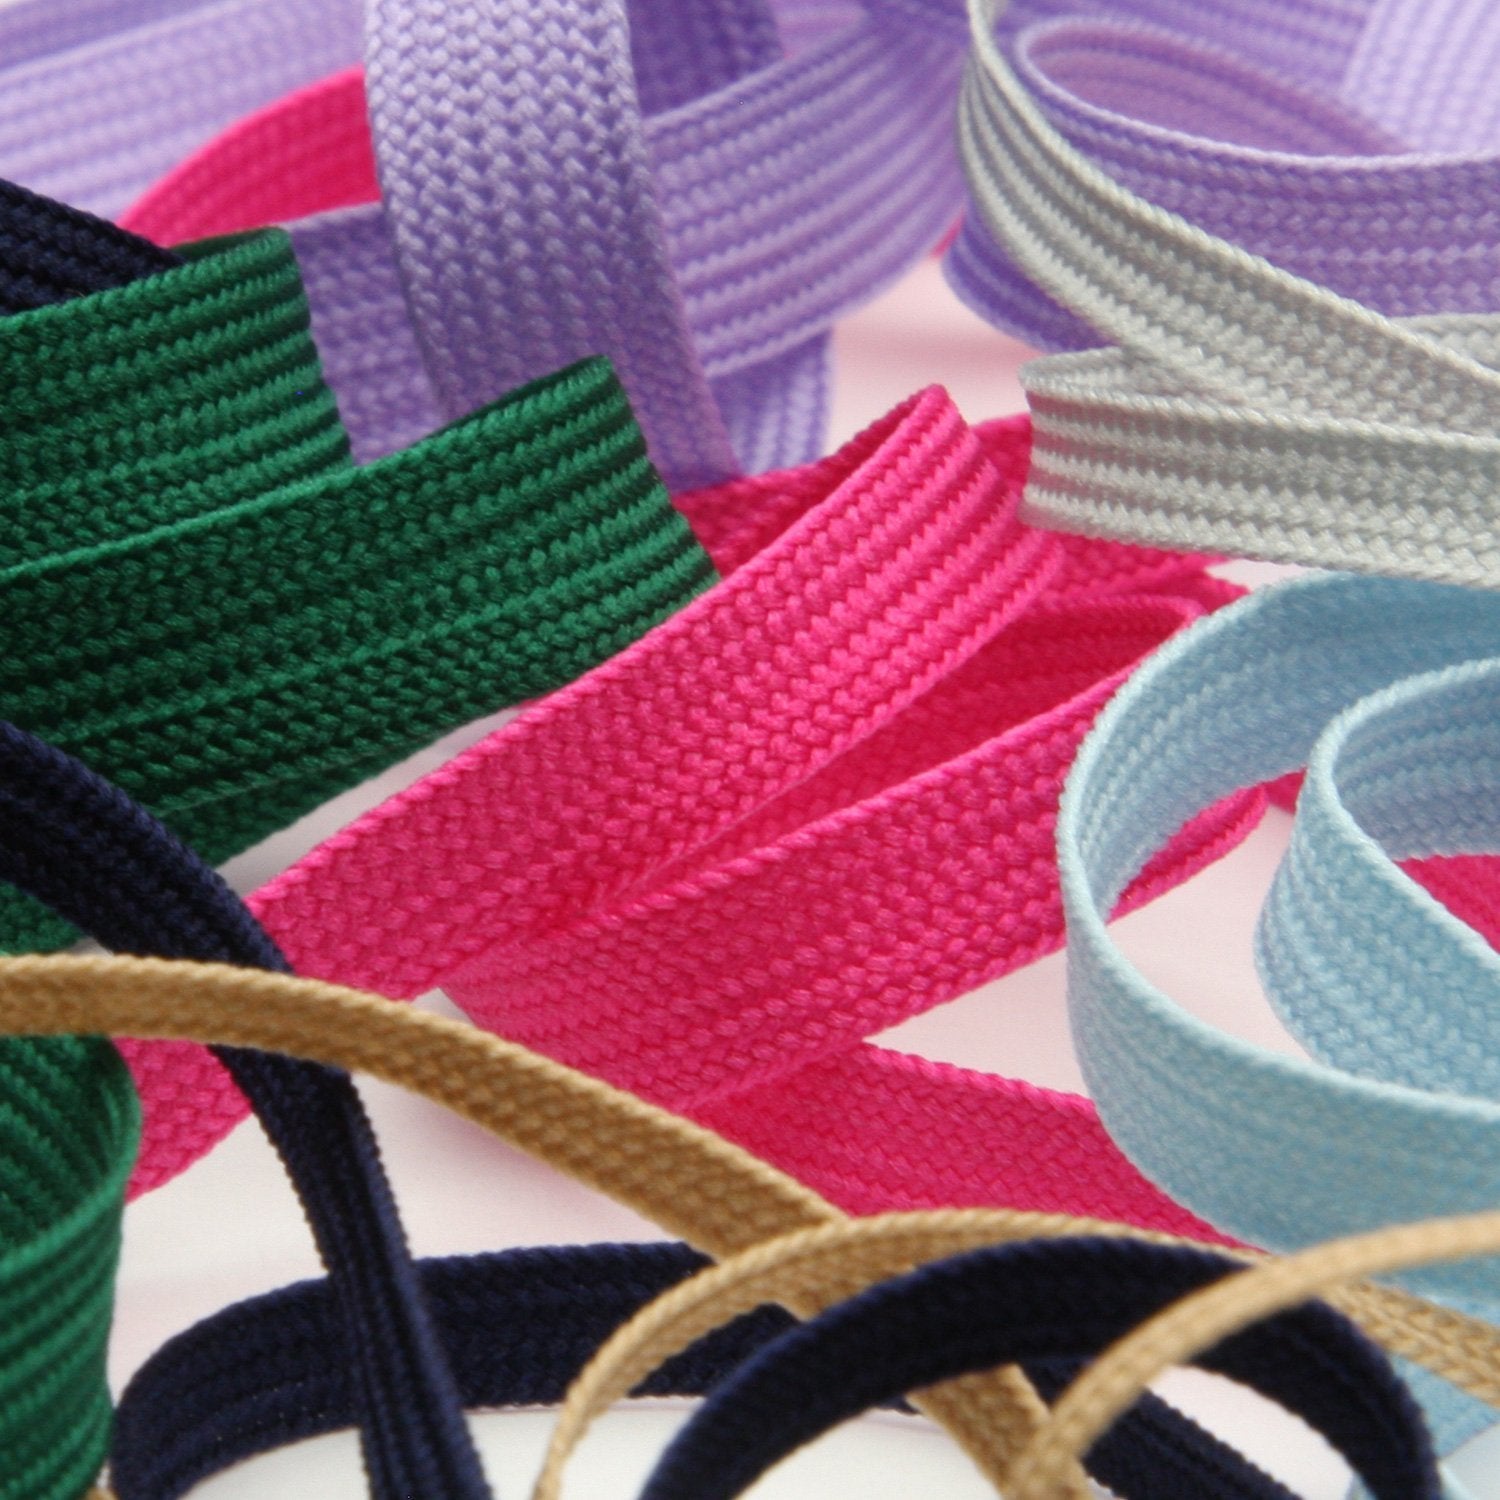 FUJIYAMA RIBBON [Wholesale] Polyester Trimming Braid approx.3mm 30 Meters Roll